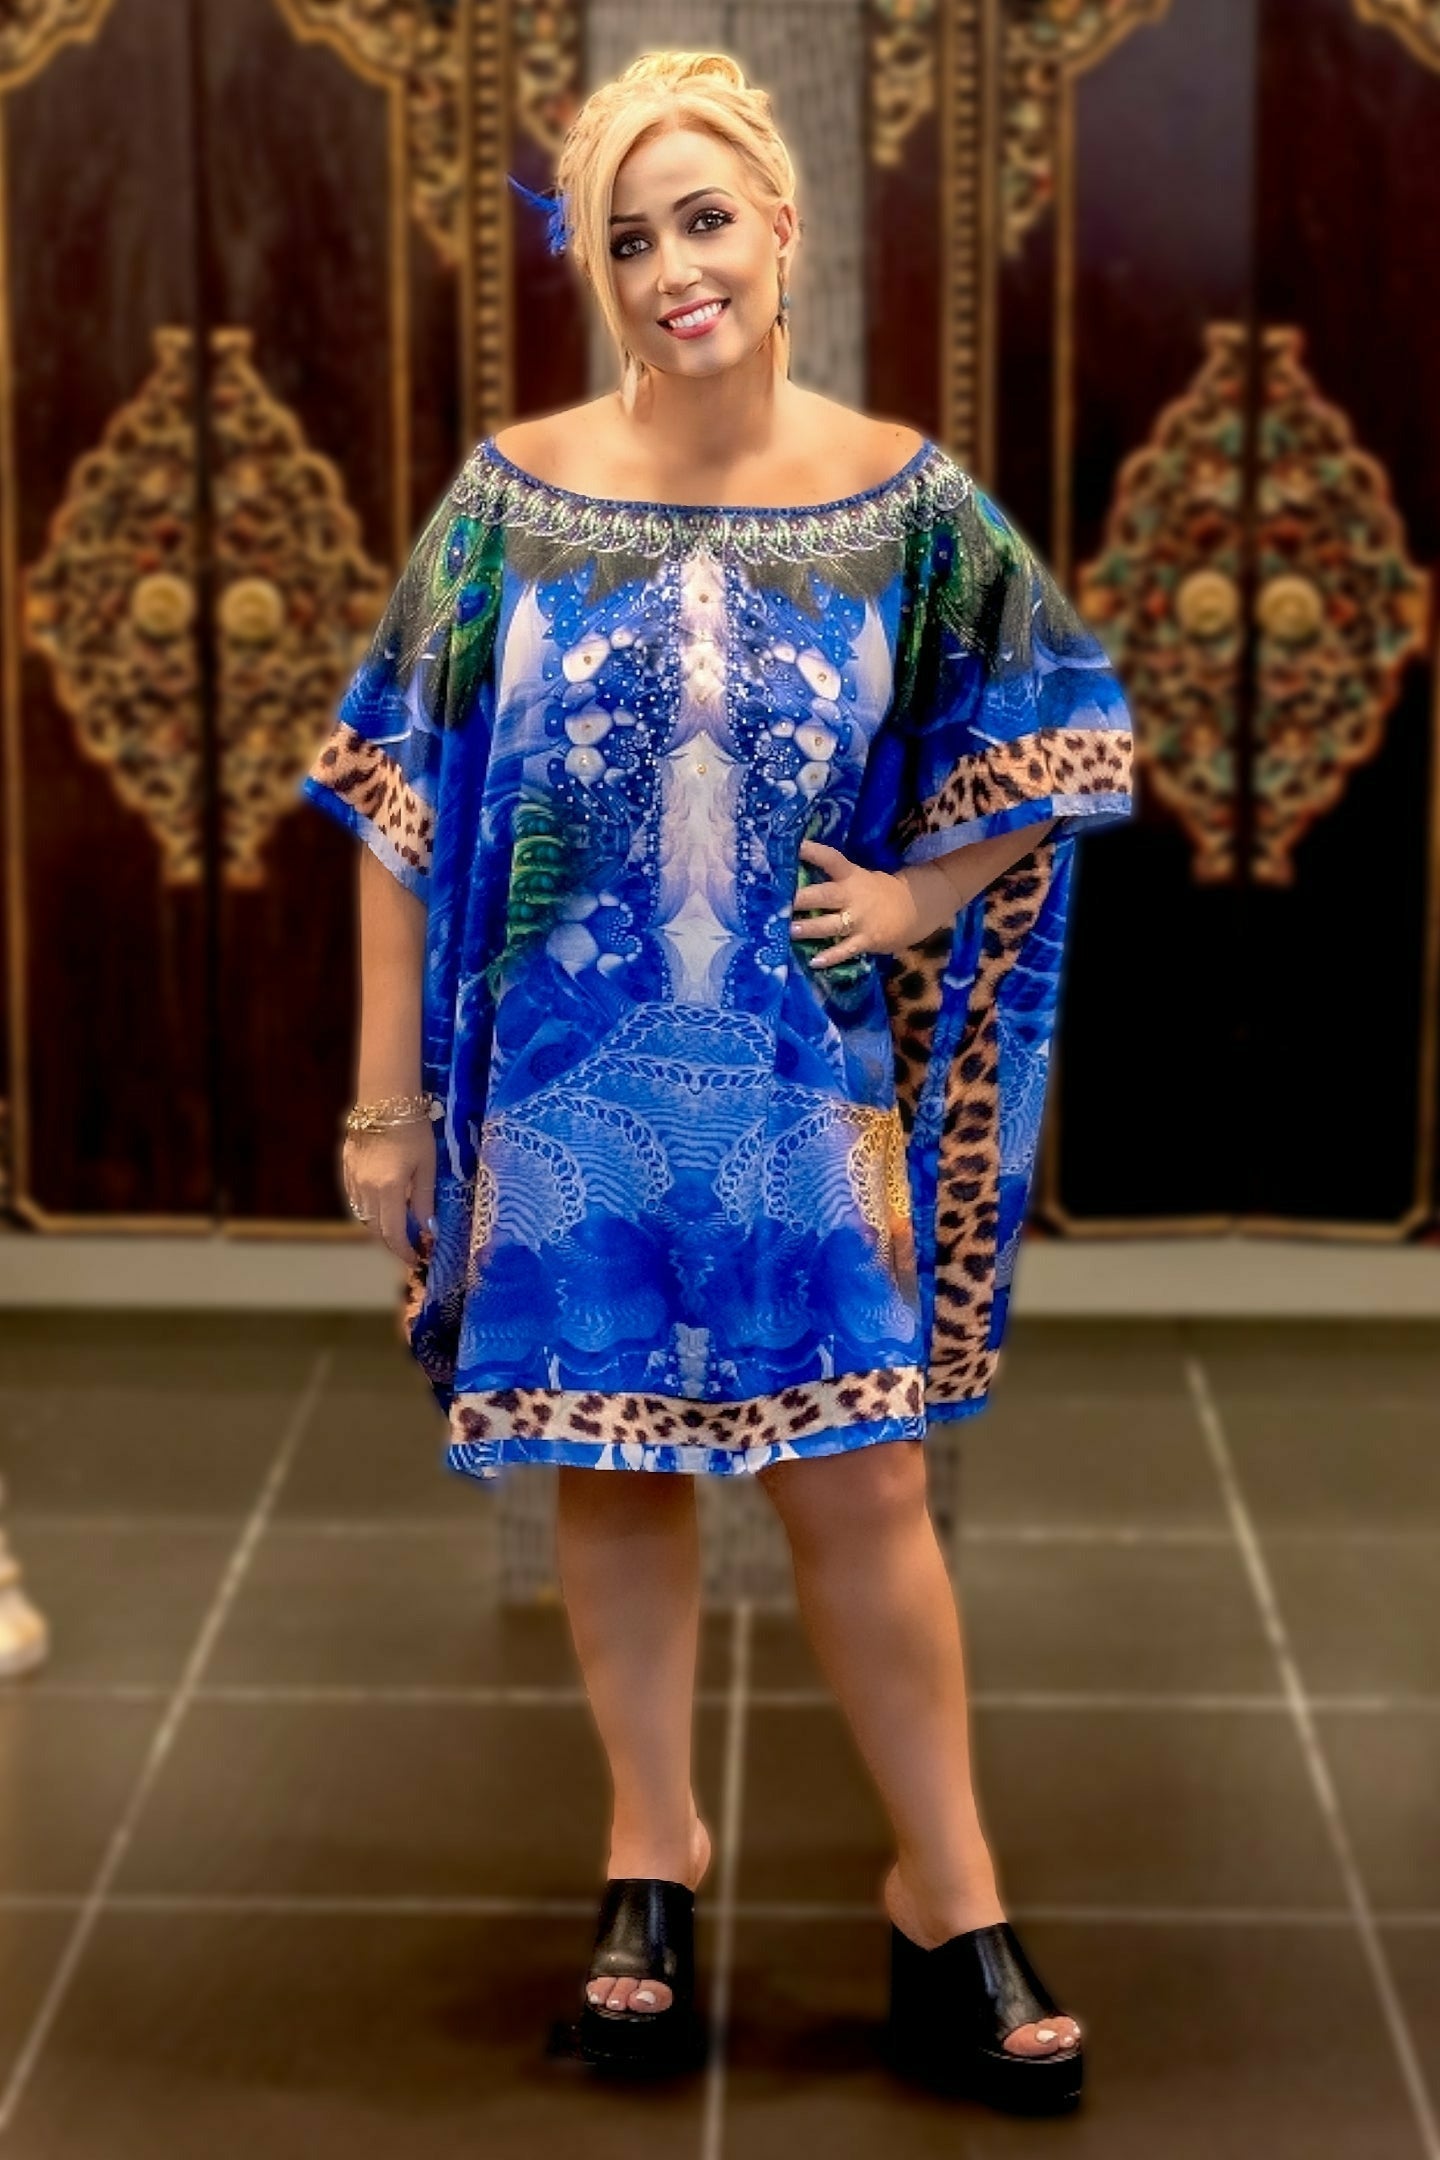 FIRST EDITION COLLECTION - Short Kaftan / Top in Box henleycollections